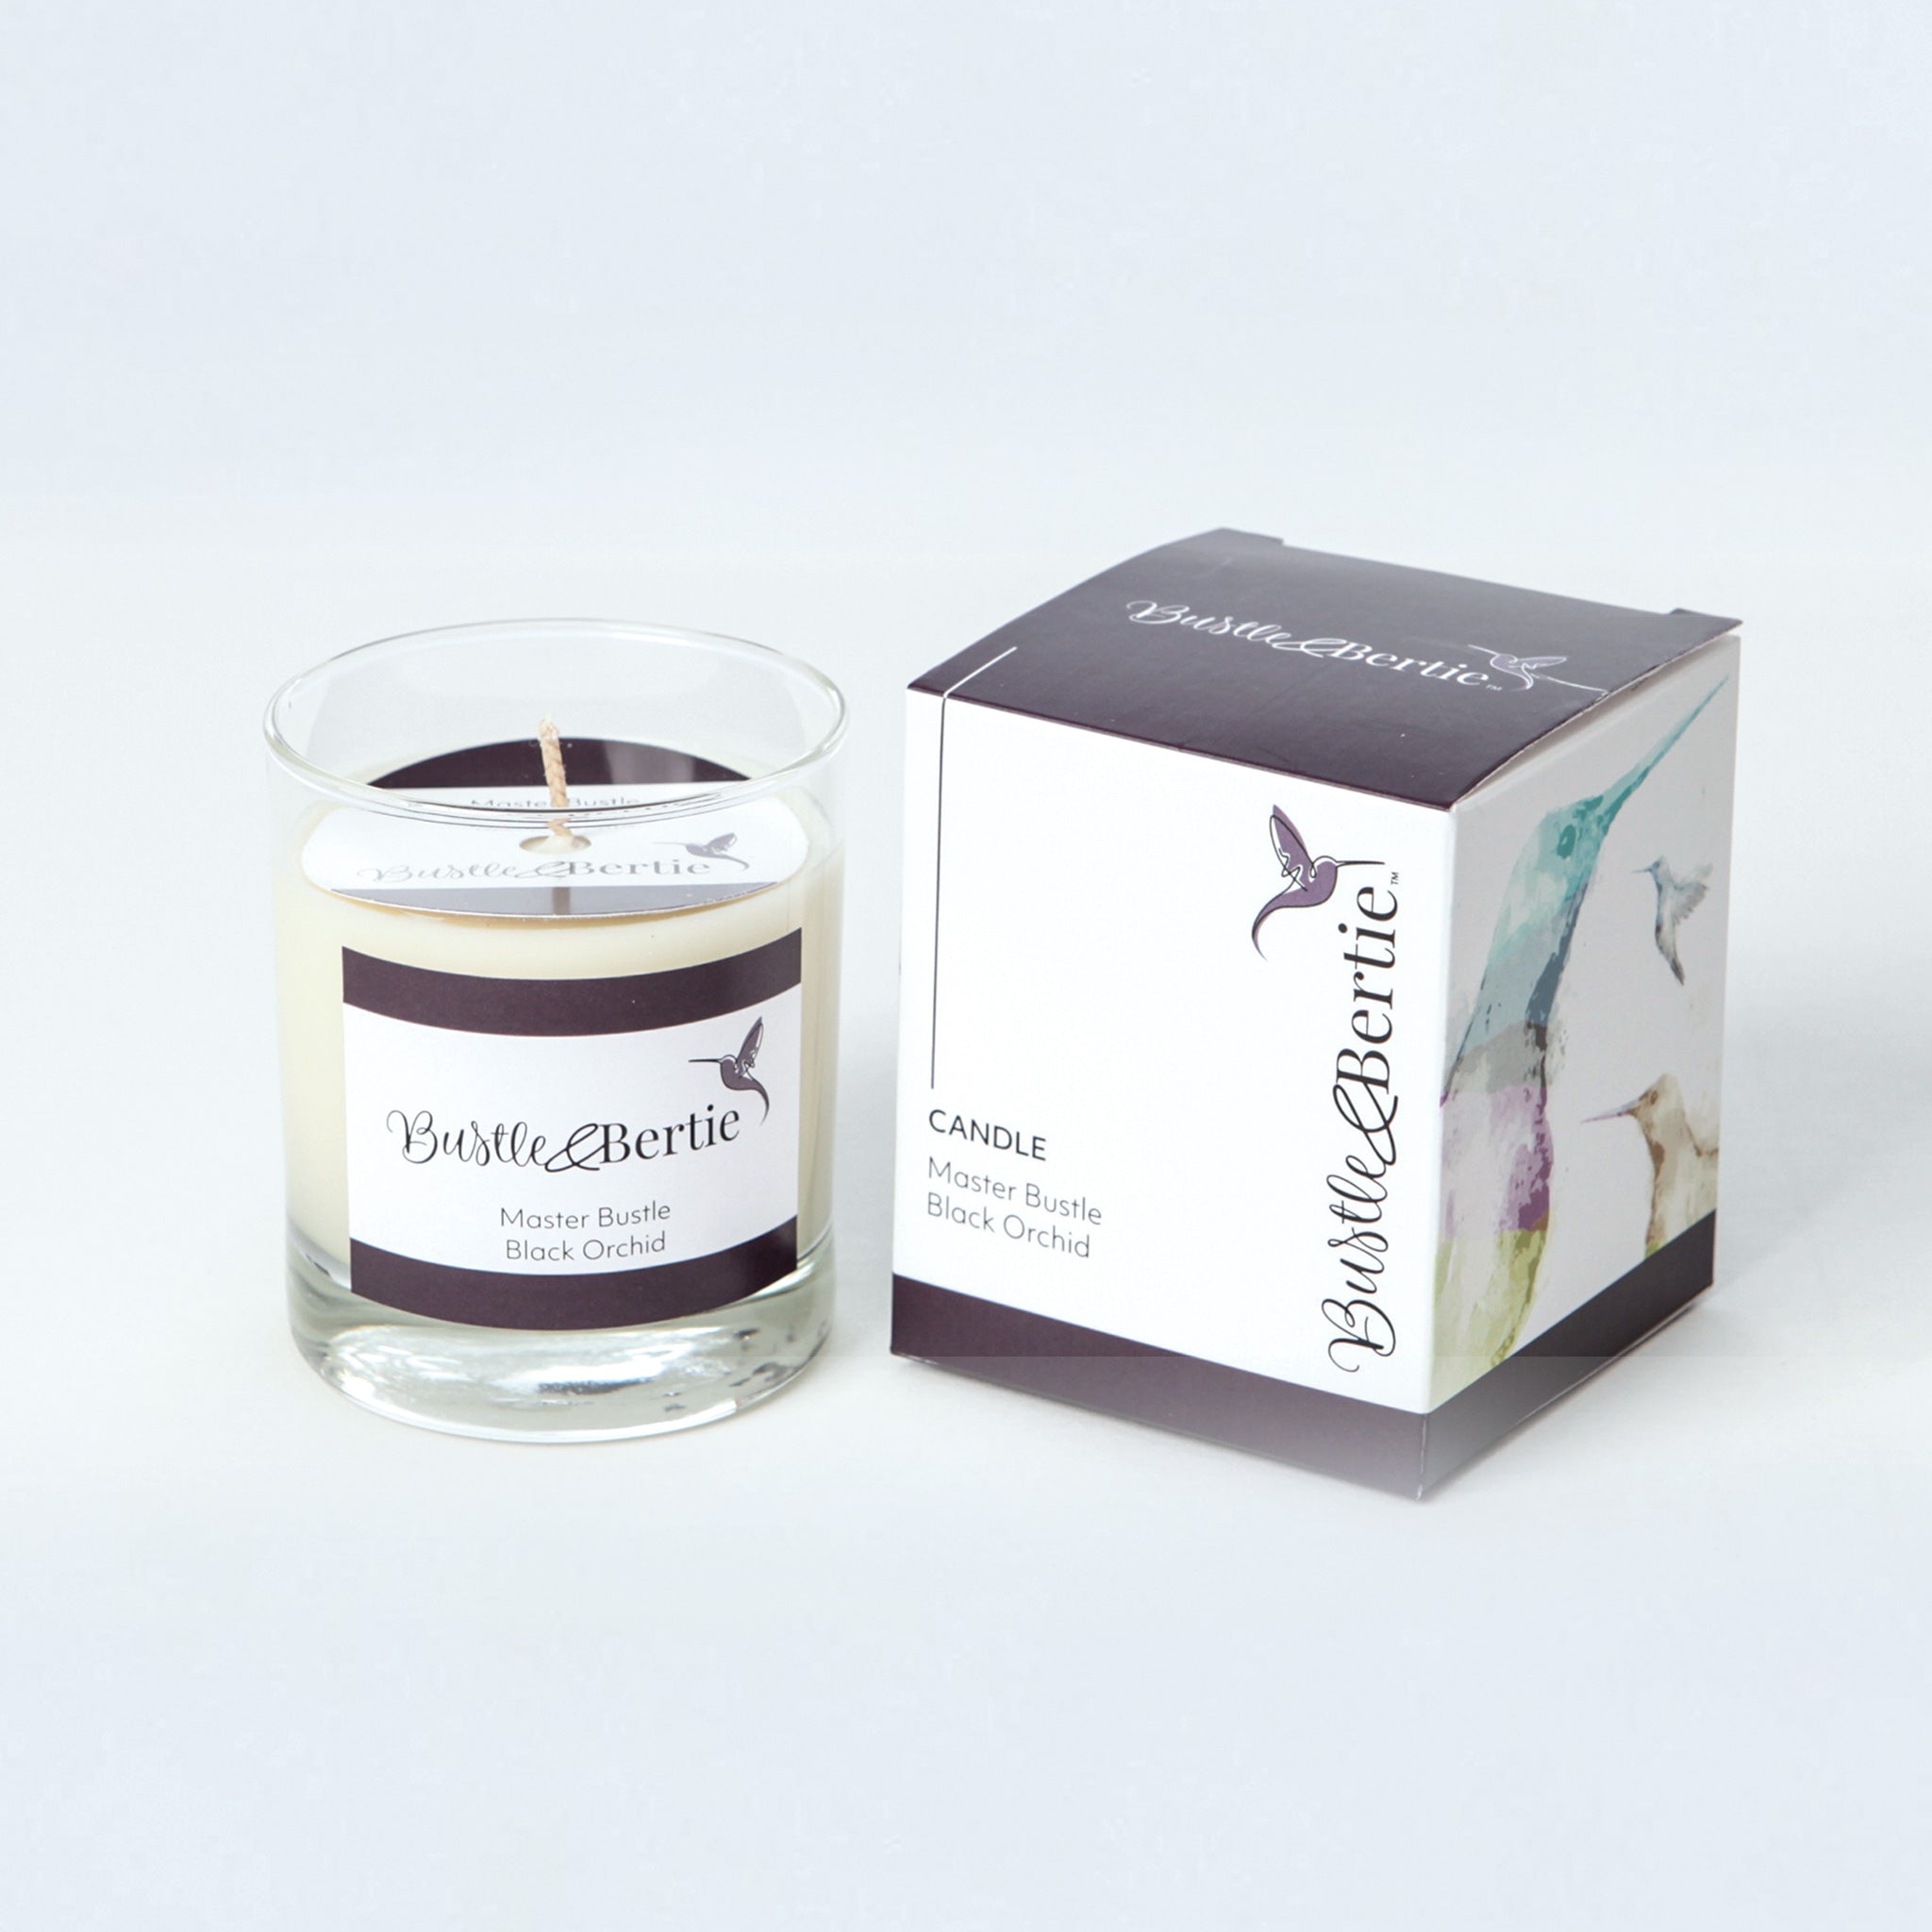 Master Bustle "Black Orchid" Candle